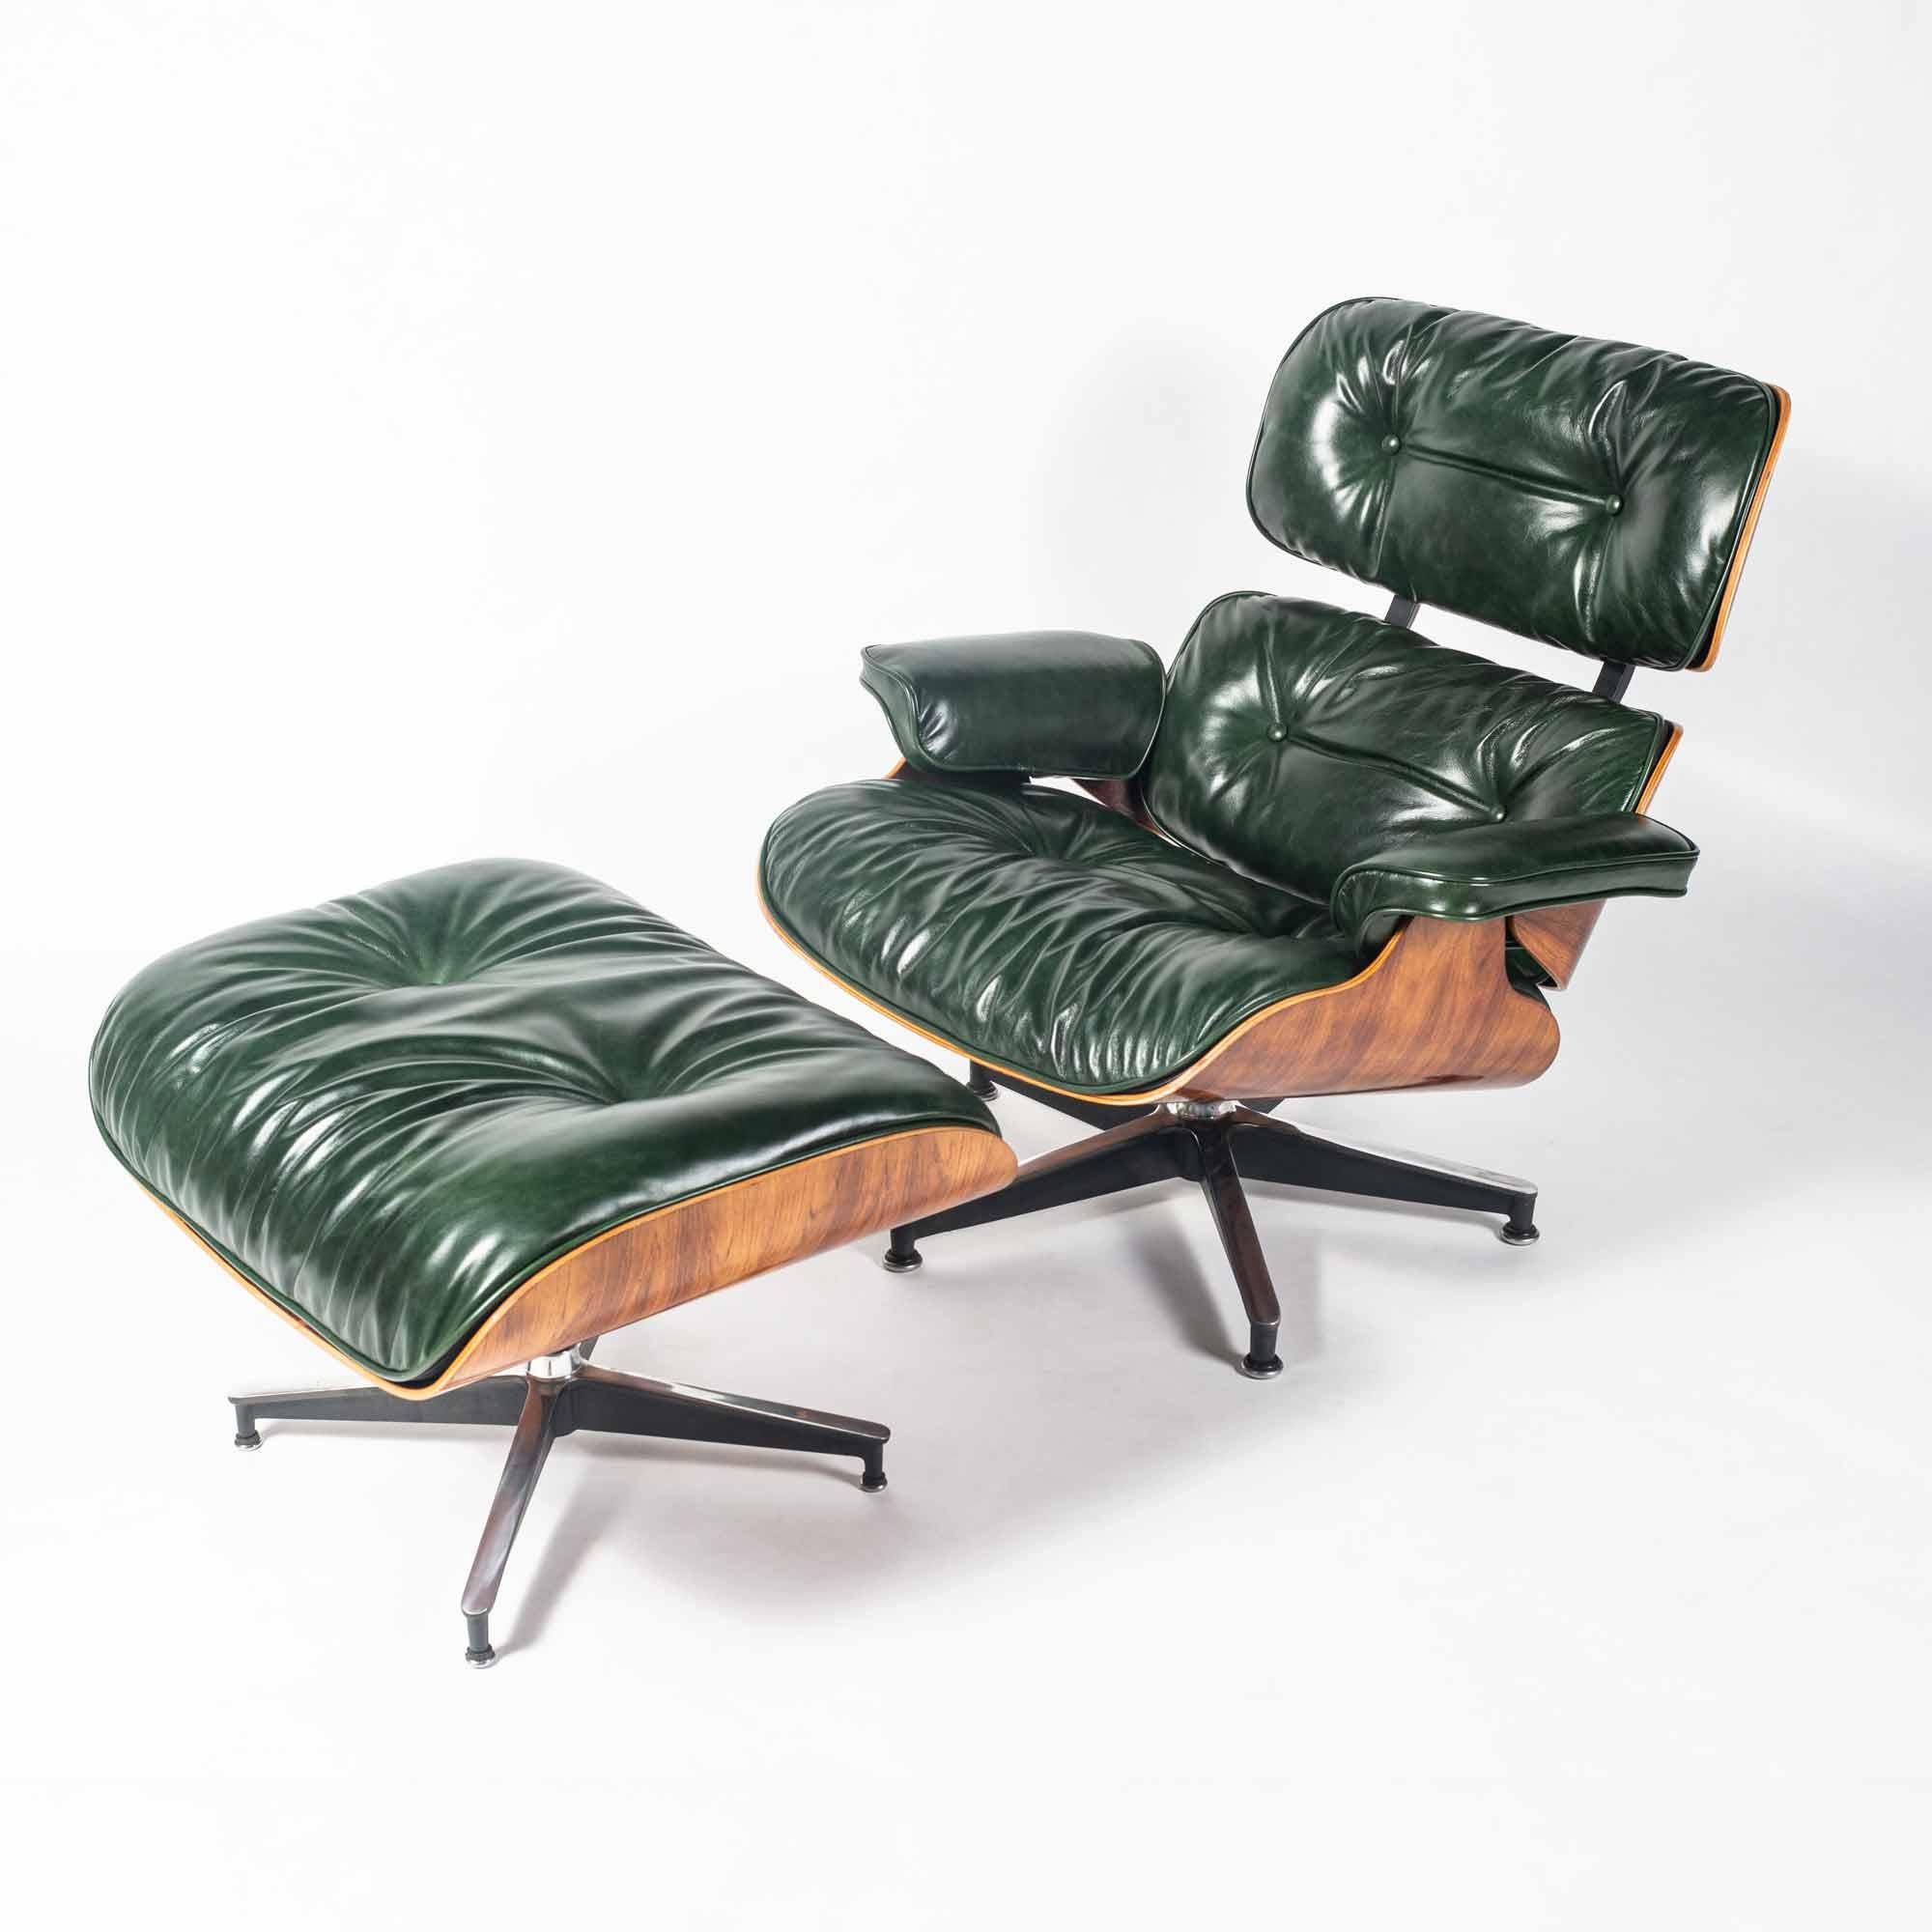 American Customed Order, 3rd Gen Eames Lounge Chair in British Racing Green Leather